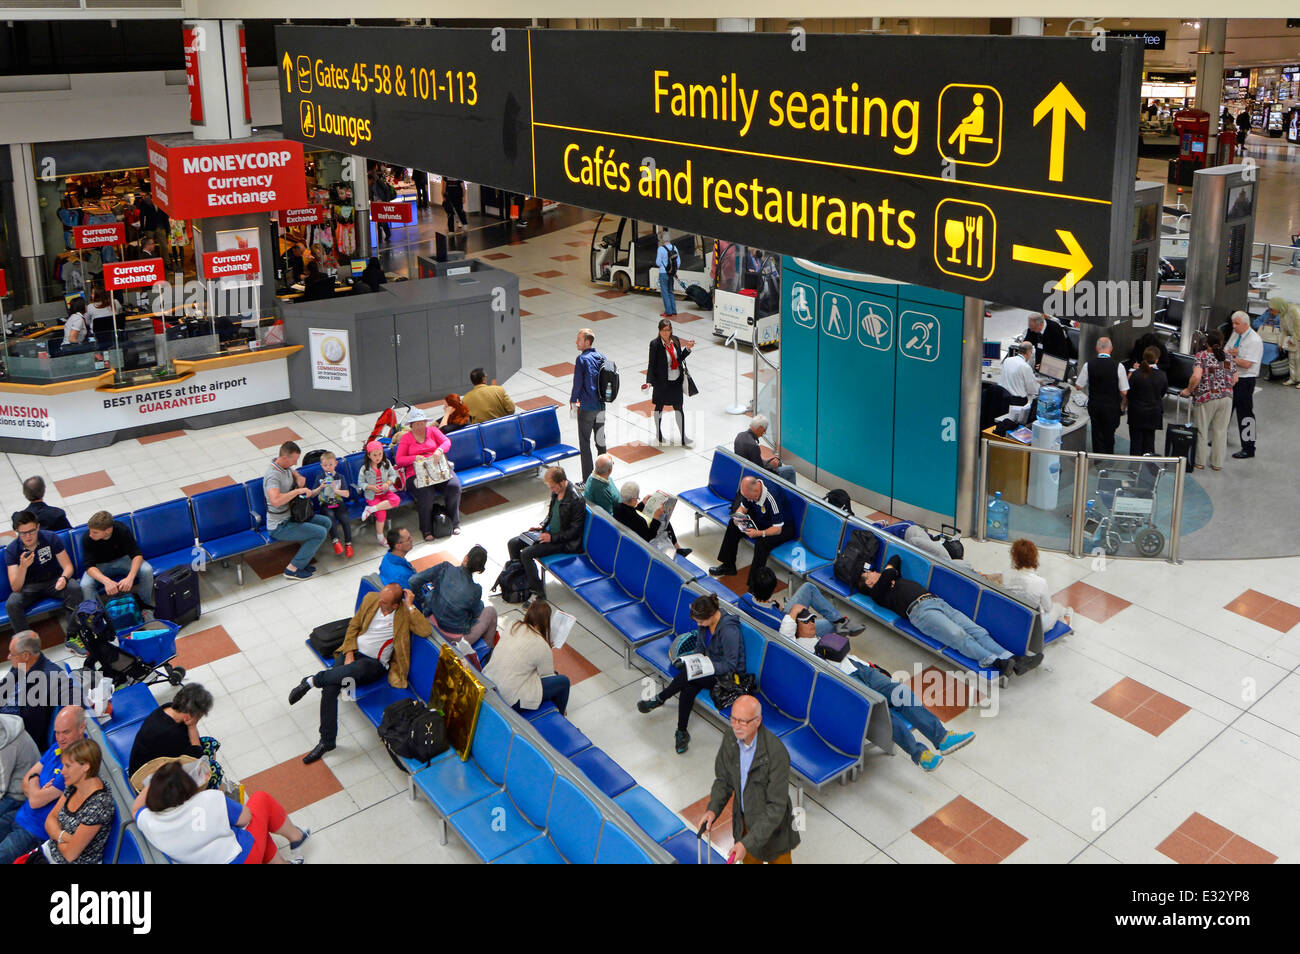 Looking down on family seating area & cafes restaurants signs London Gatwick Airport North Terminal departure lounge and shopping concourse England UK Stock Photo